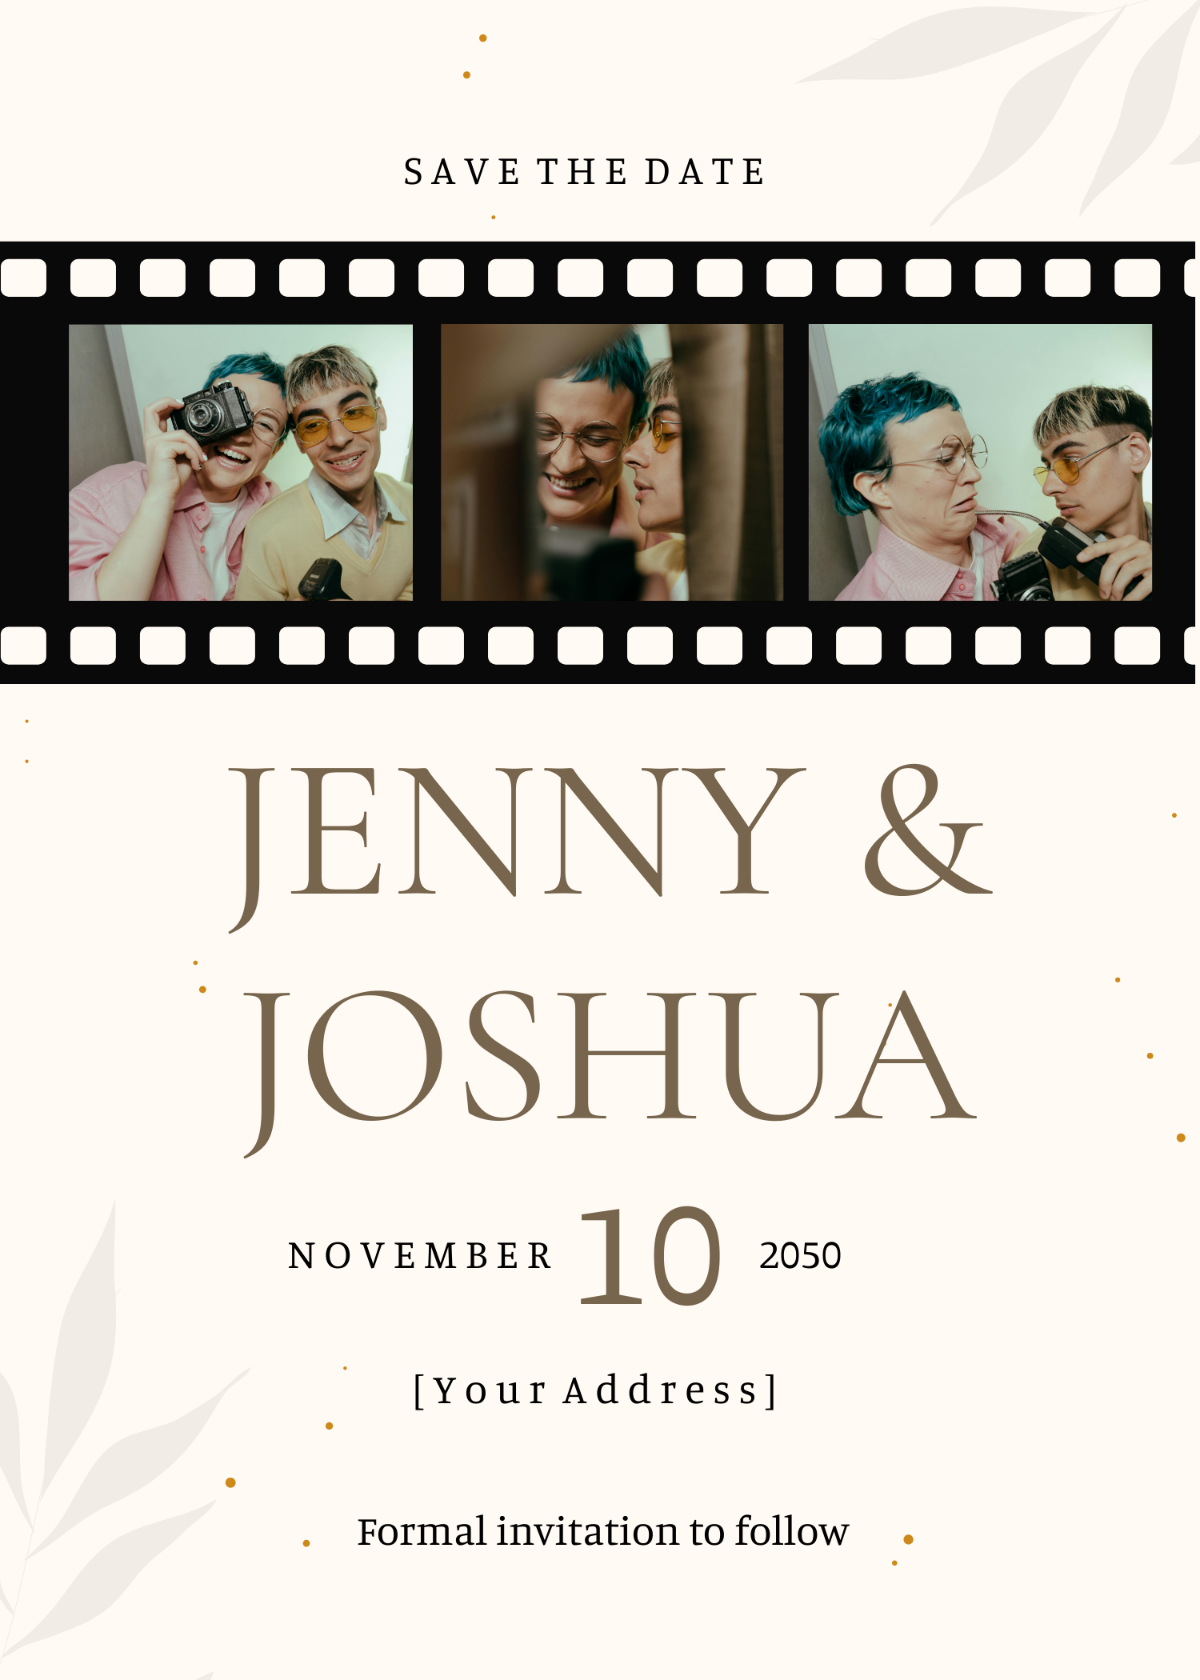 Photo Strip Save the Date